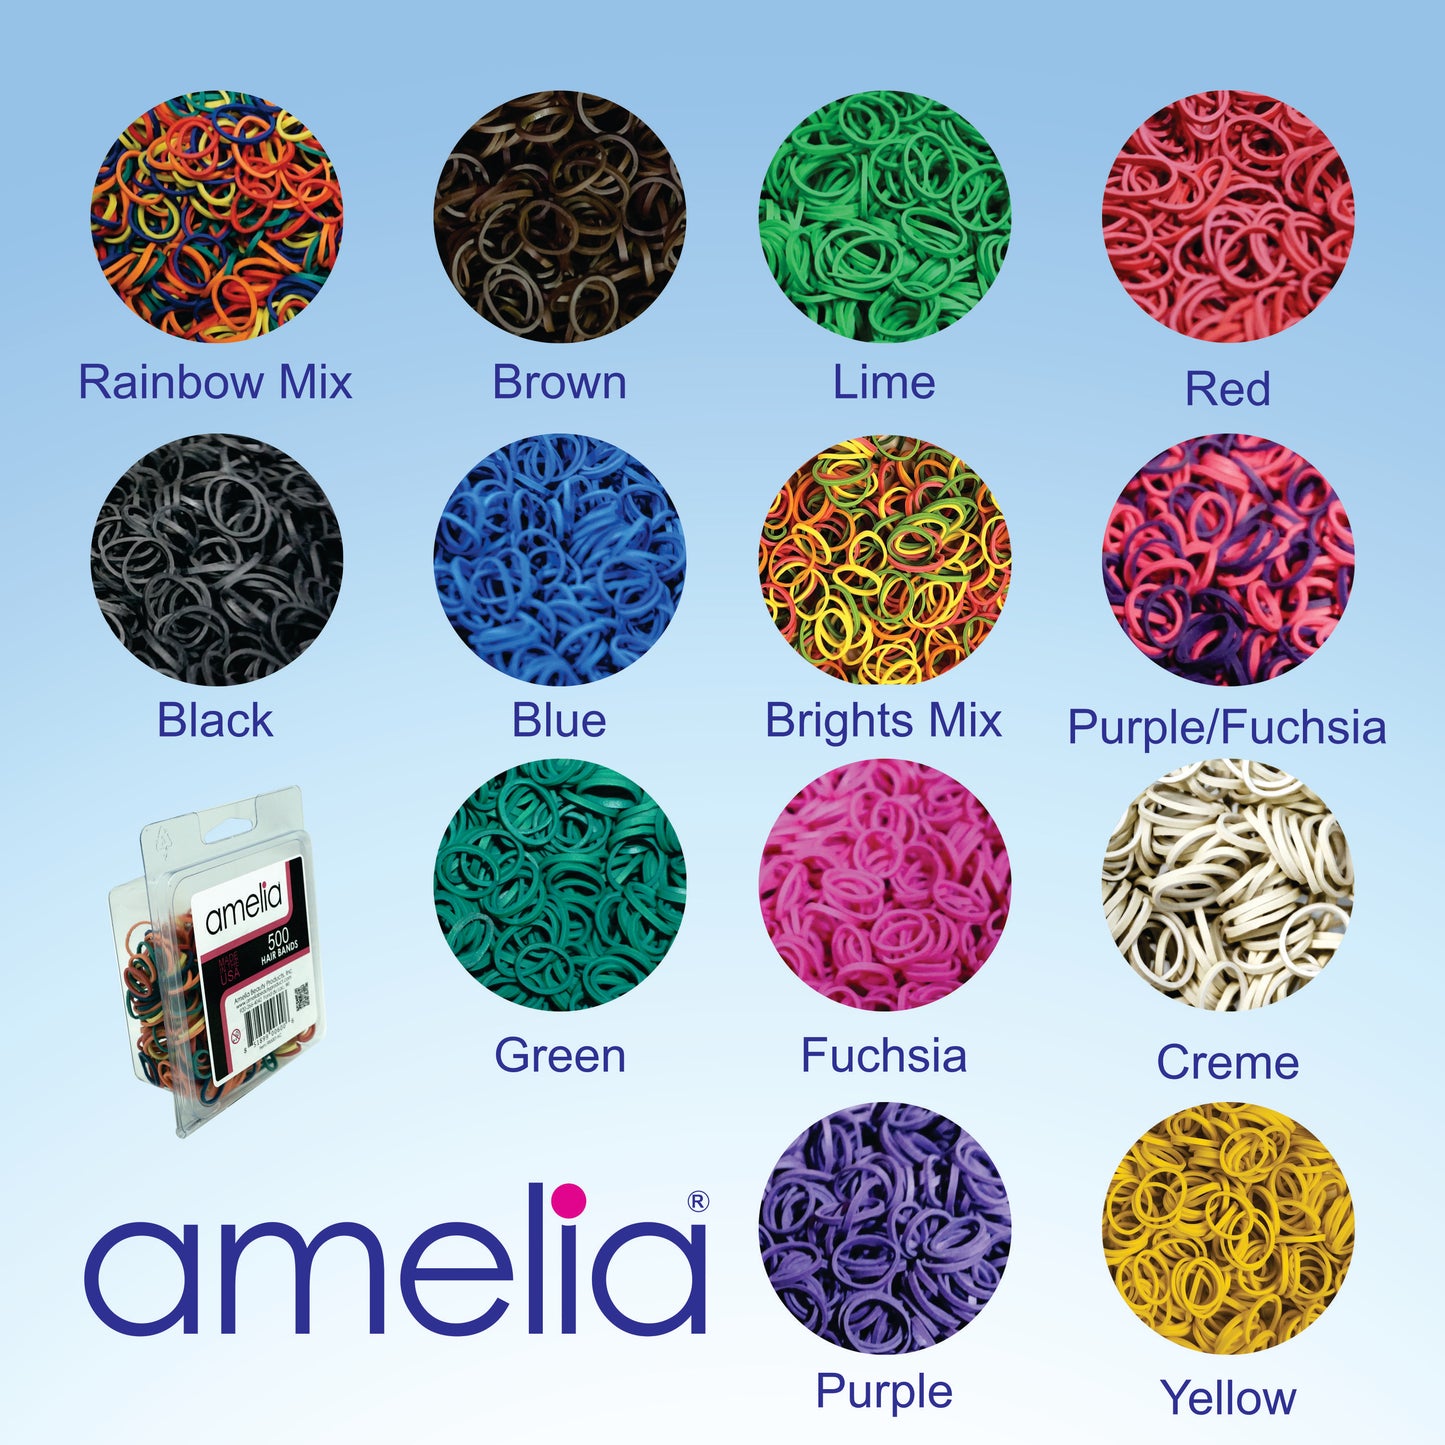 Amelia Beauty | 1/2in, Black, Elastic Rubber Band Pony Tail Holders | Made in USA, Ideal for Ponytails, Braids, Twists, Dreadlocks, Styling Accessories for Women, Men and Girls | 1000 Pack